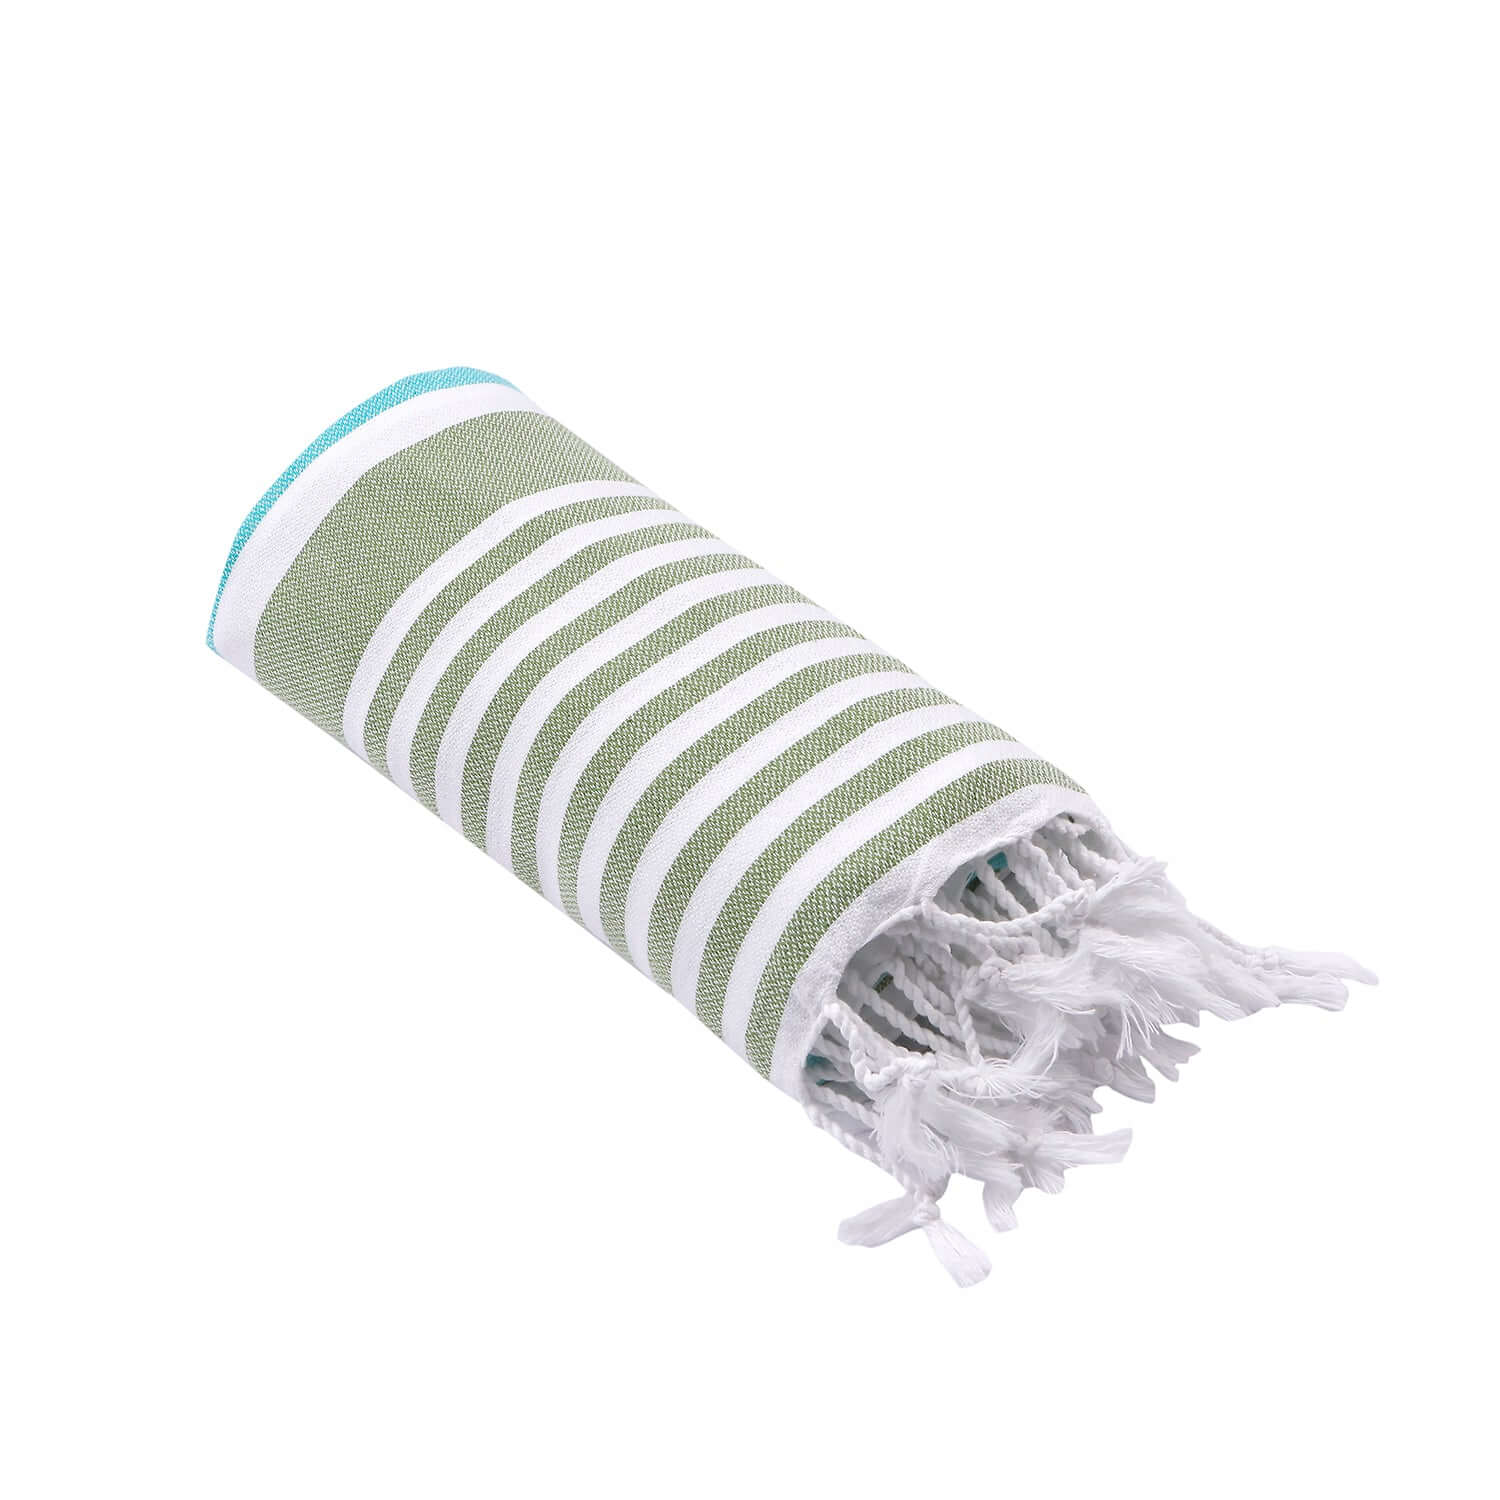  Rolled-up Loom Legacy turquoise and green beach towel with subtle white vertical stripes. One end of the towel showcases fringed white tassels, all presented against a white background.